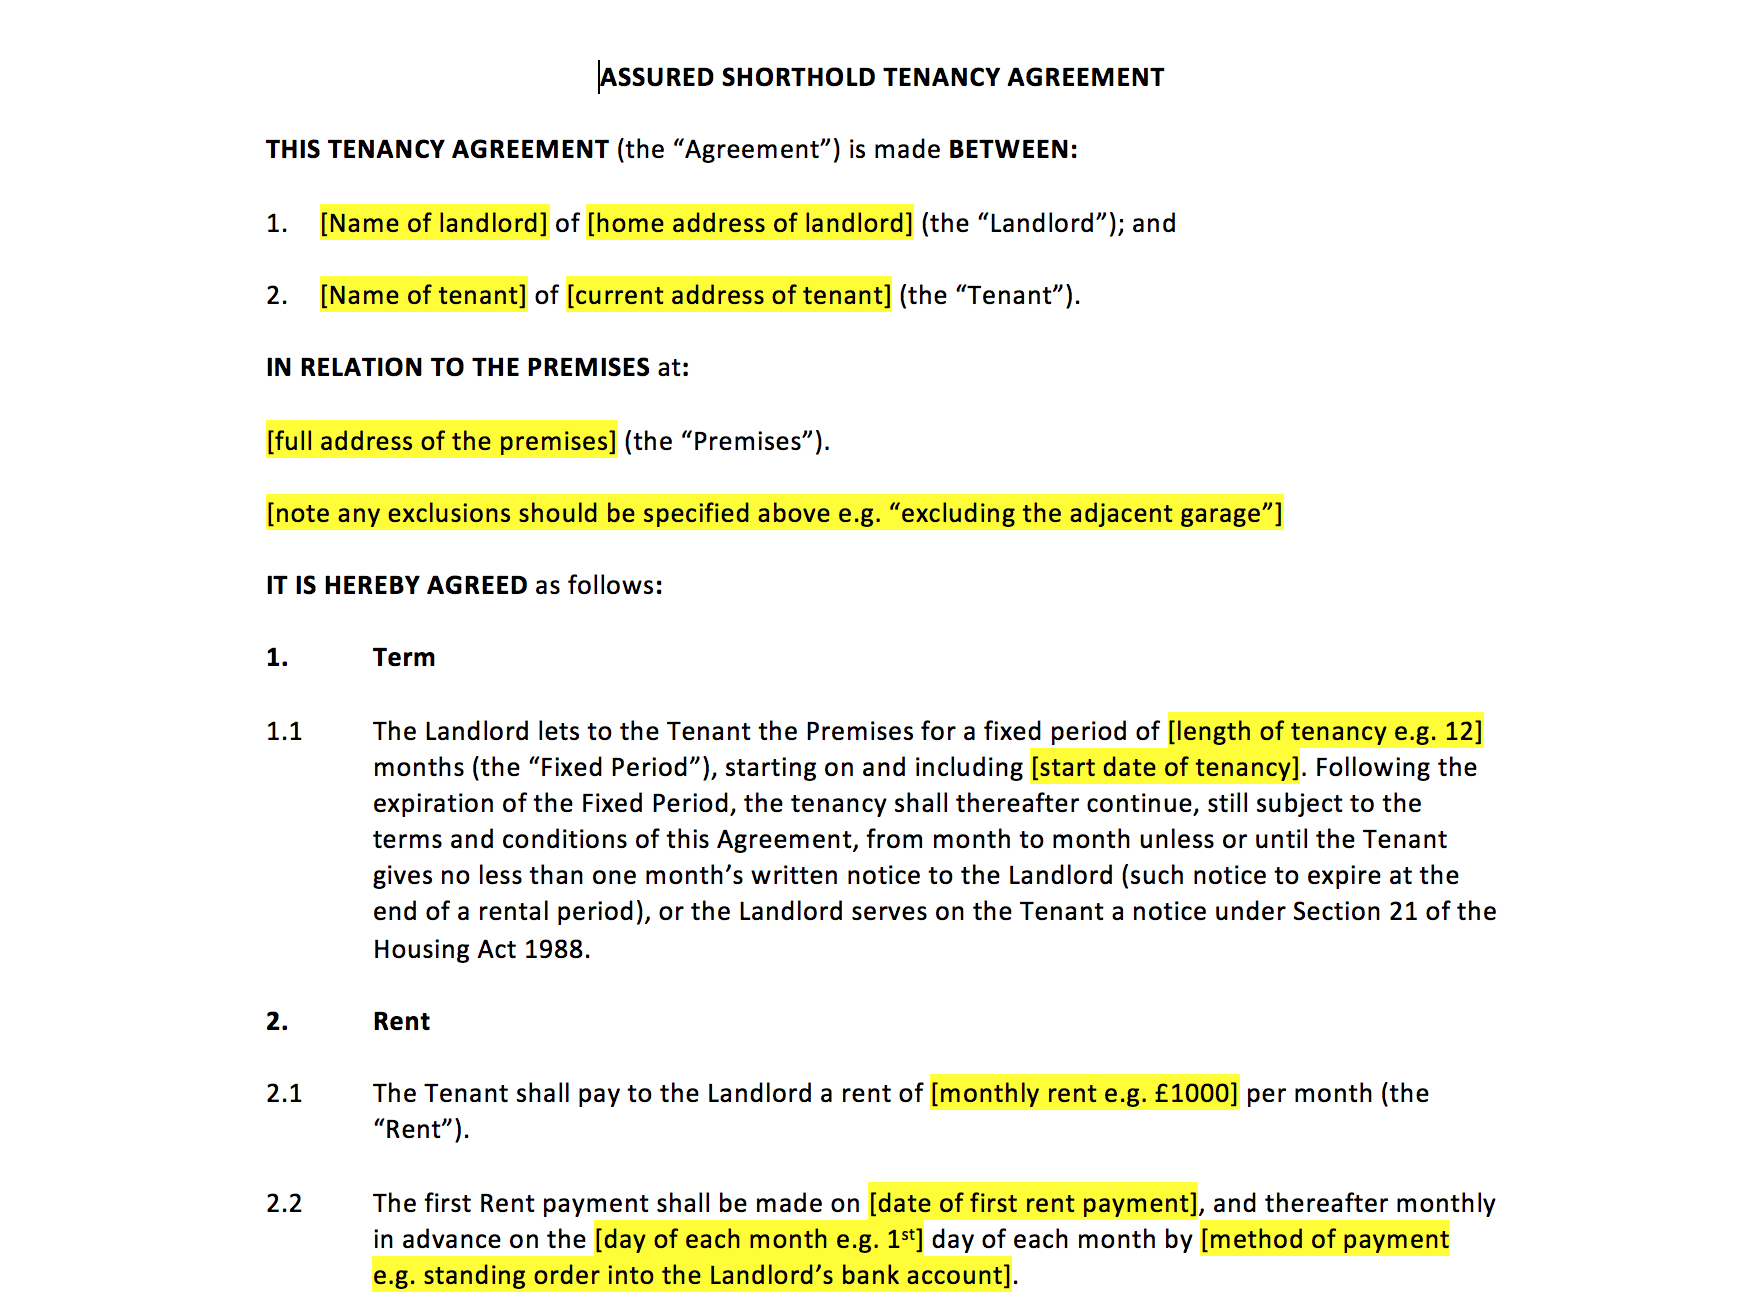 Tenancy Agreement Template intended for Assured Short Term Tenancy Agreement Template